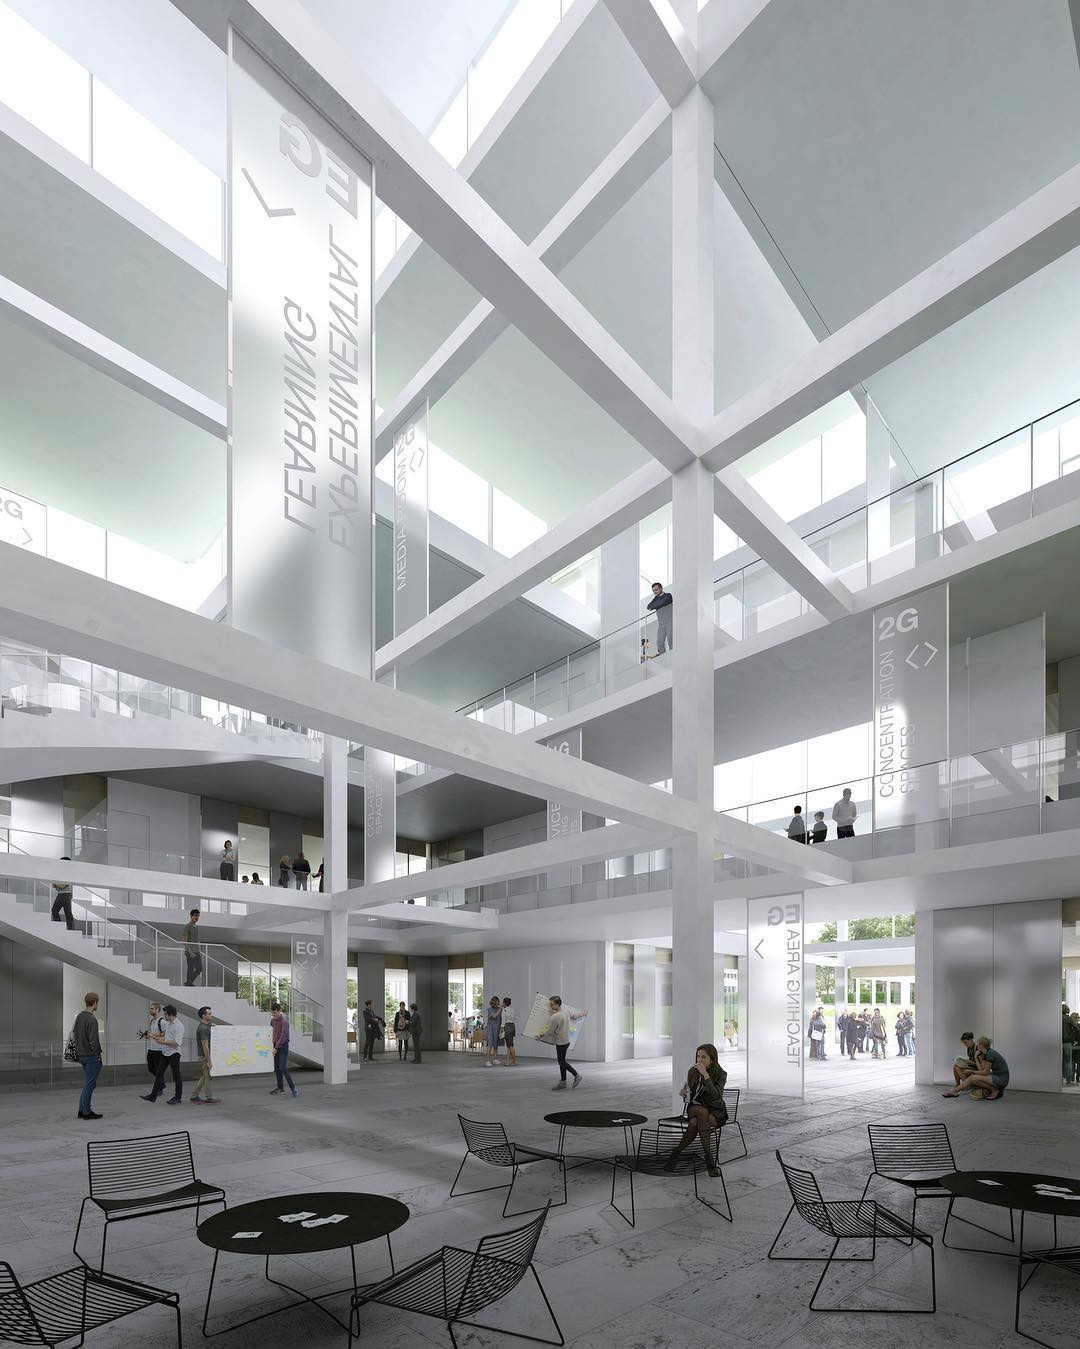 A rendering for Sou Fujimoto's HSG Learning Center in St. Gallen university, Switzerland.